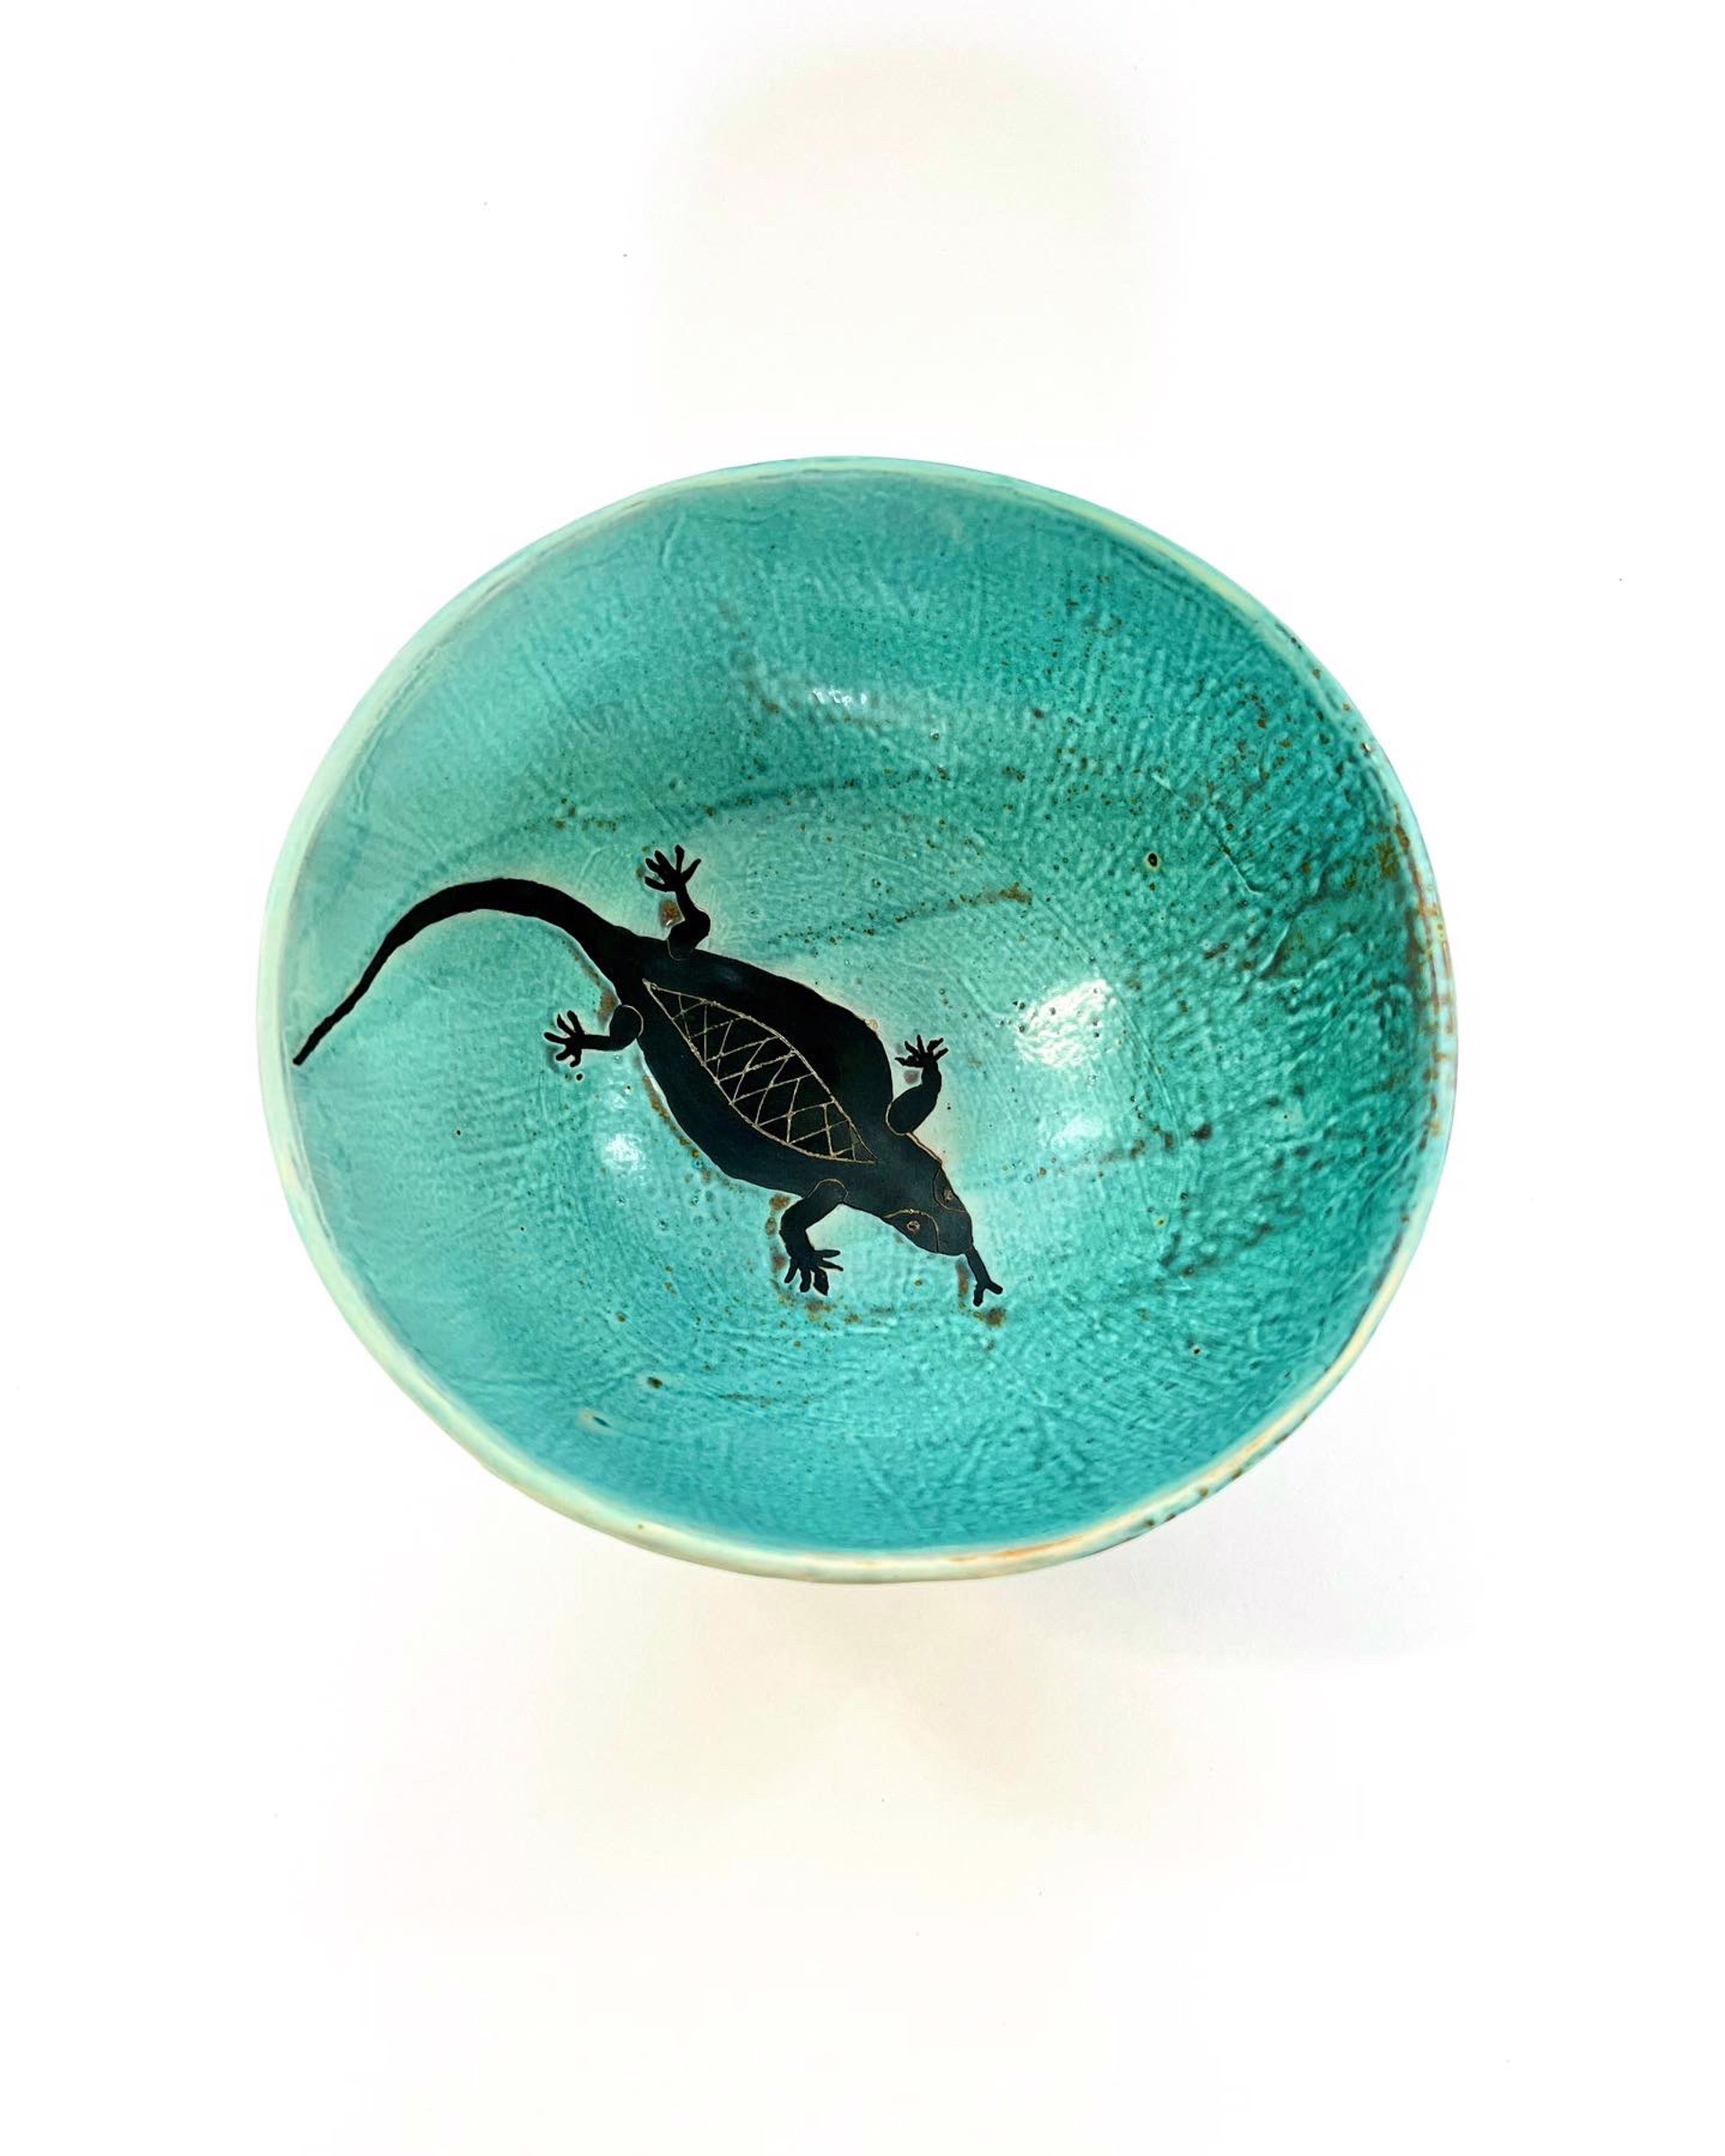 Bowl -  Blue with Arizona Fence Lizard by Curtis Hoard